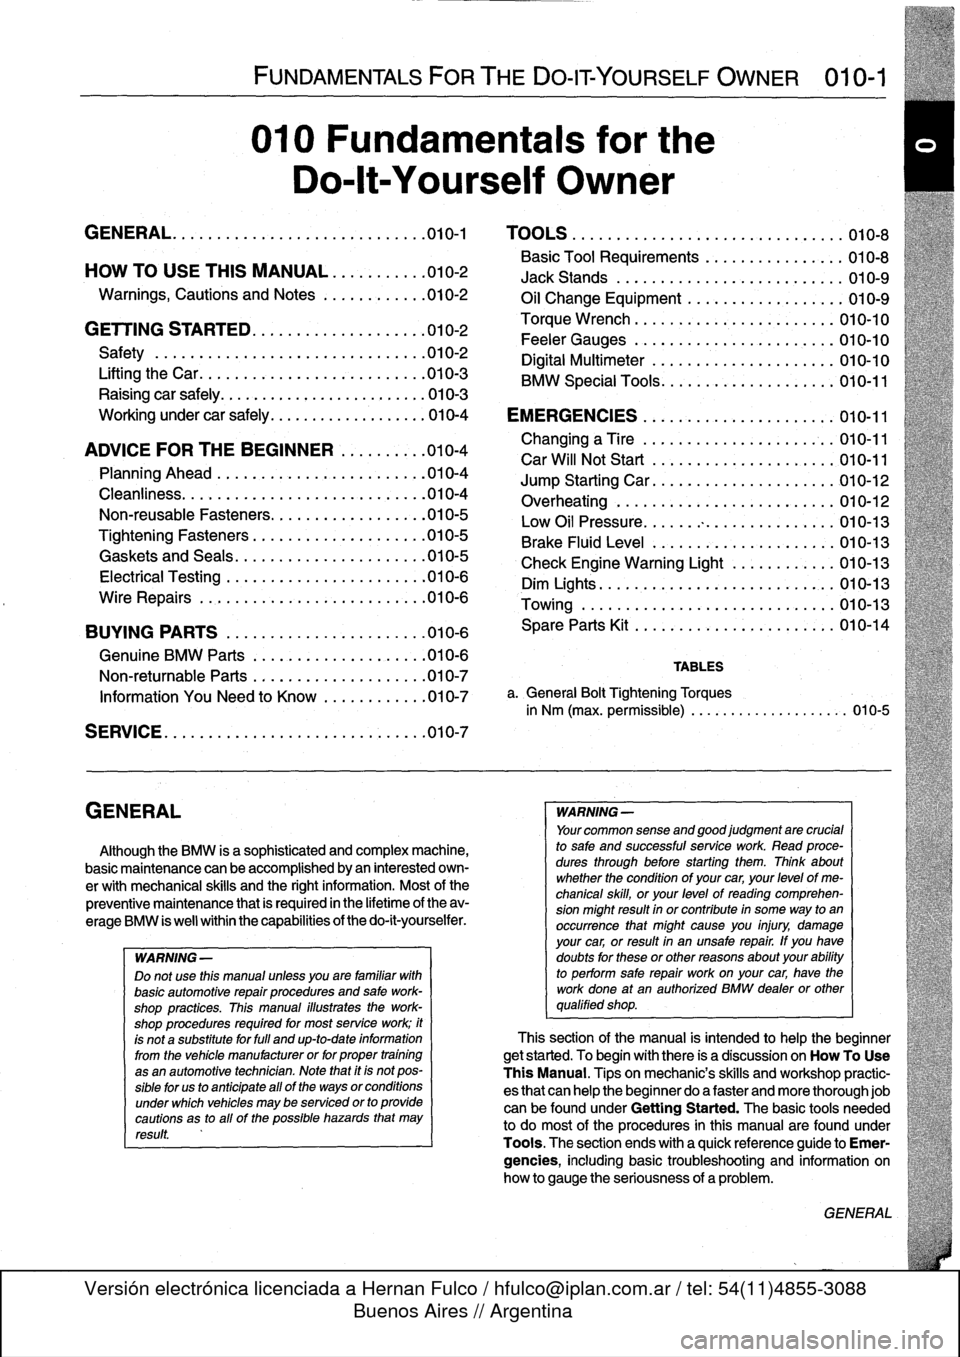 BMW 323i 1992 E36 Workshop Manual 
GENERAL

FUNDAMENTALS
FORTHE
DO-IT
YOURSELF
OWNER

	

010-1

010
Fundamentals
for
the

Do-lt-Yourself
Owner

GENERAL
.......
.
.
.
......
.
.........
.
.
.010-1

	

TOOLS
.
.
...
.
............
.
...